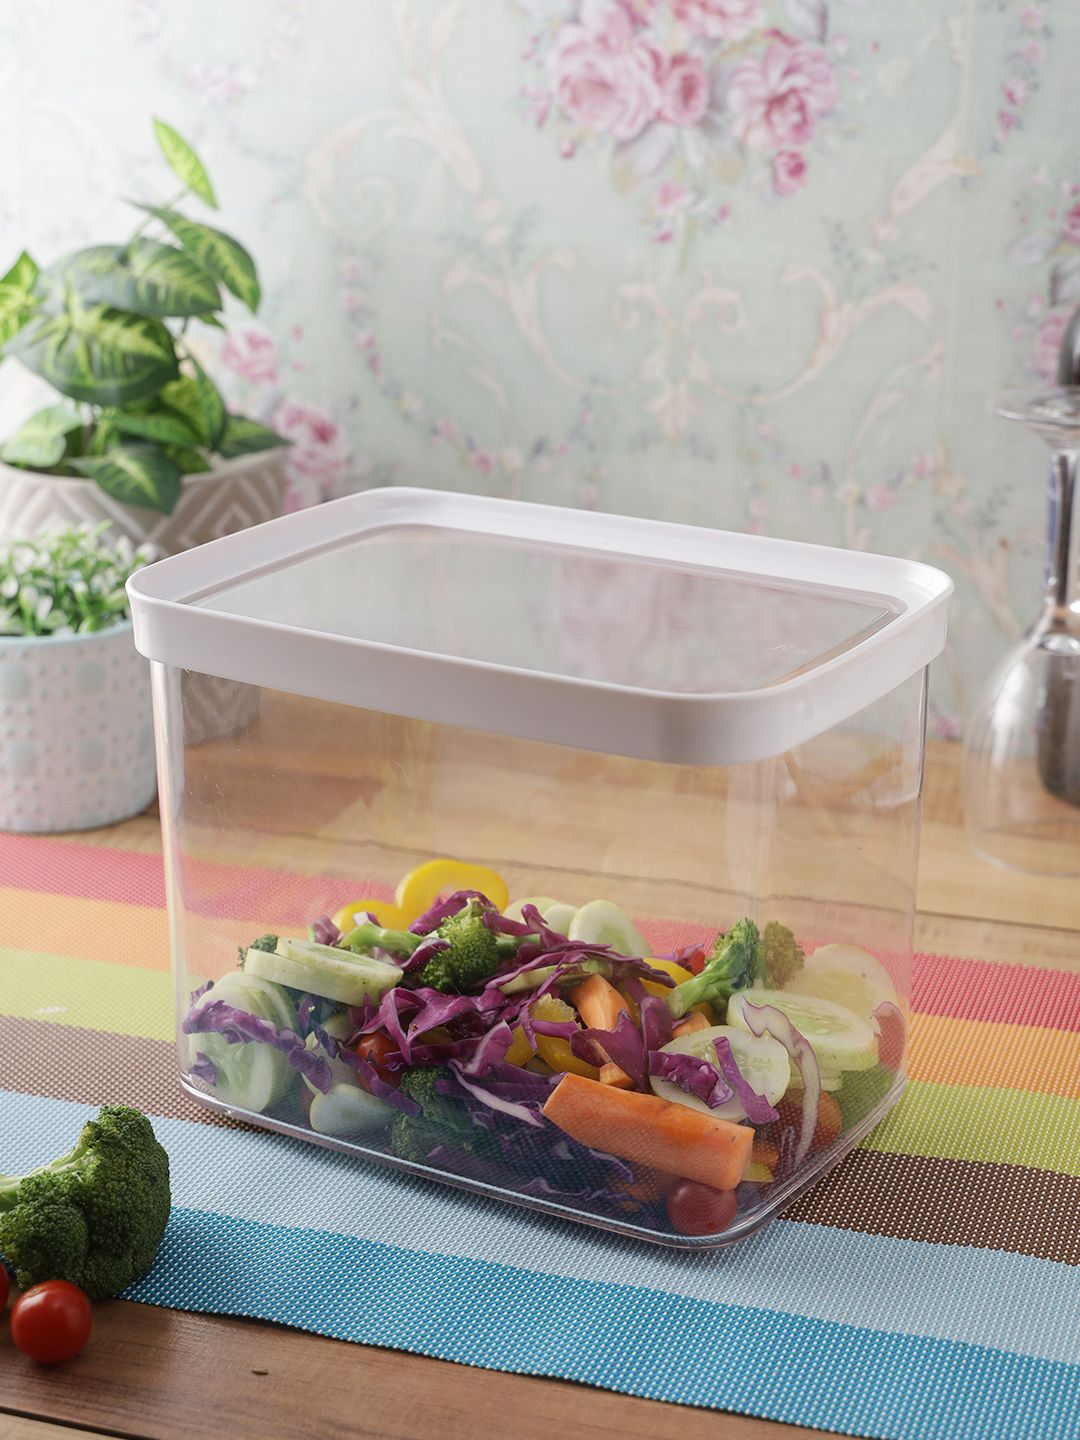 Felli Transparent & White Solid Air Tight Food Container Price in India